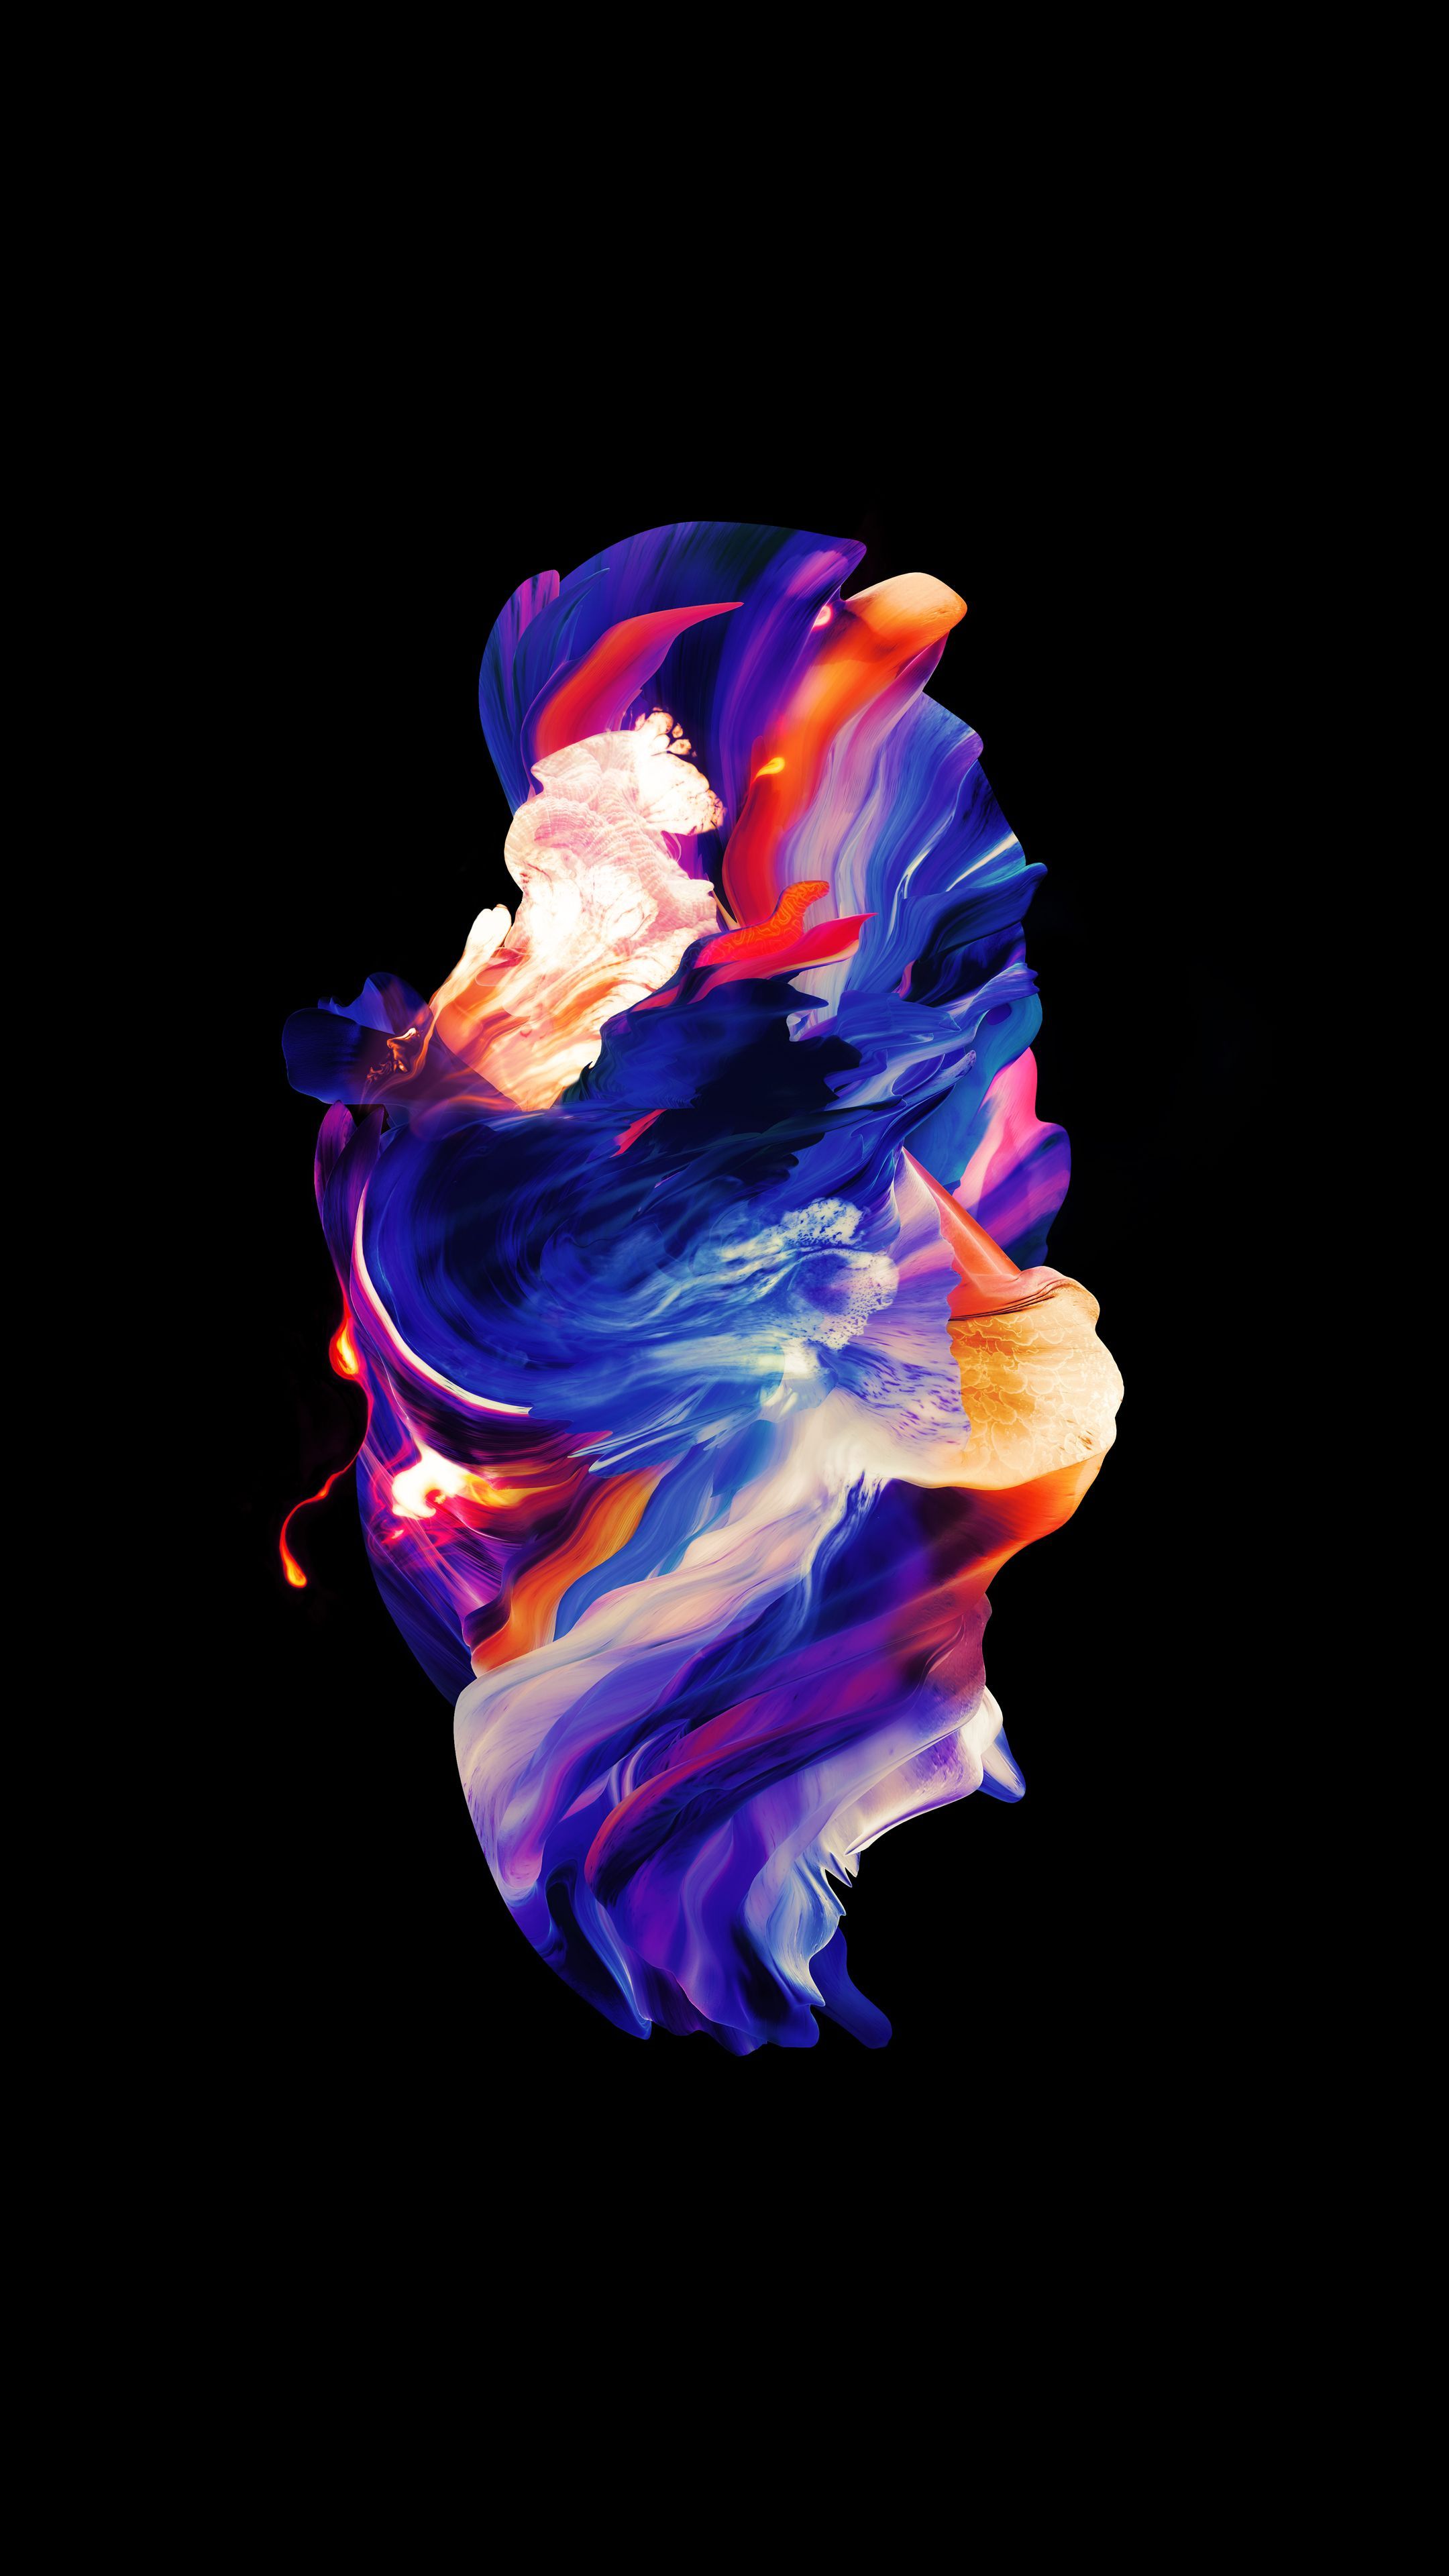 Download HD Amoled Wallpaper – A dynamic blend of colors and forms Wallpaper  | Wallpapers.com